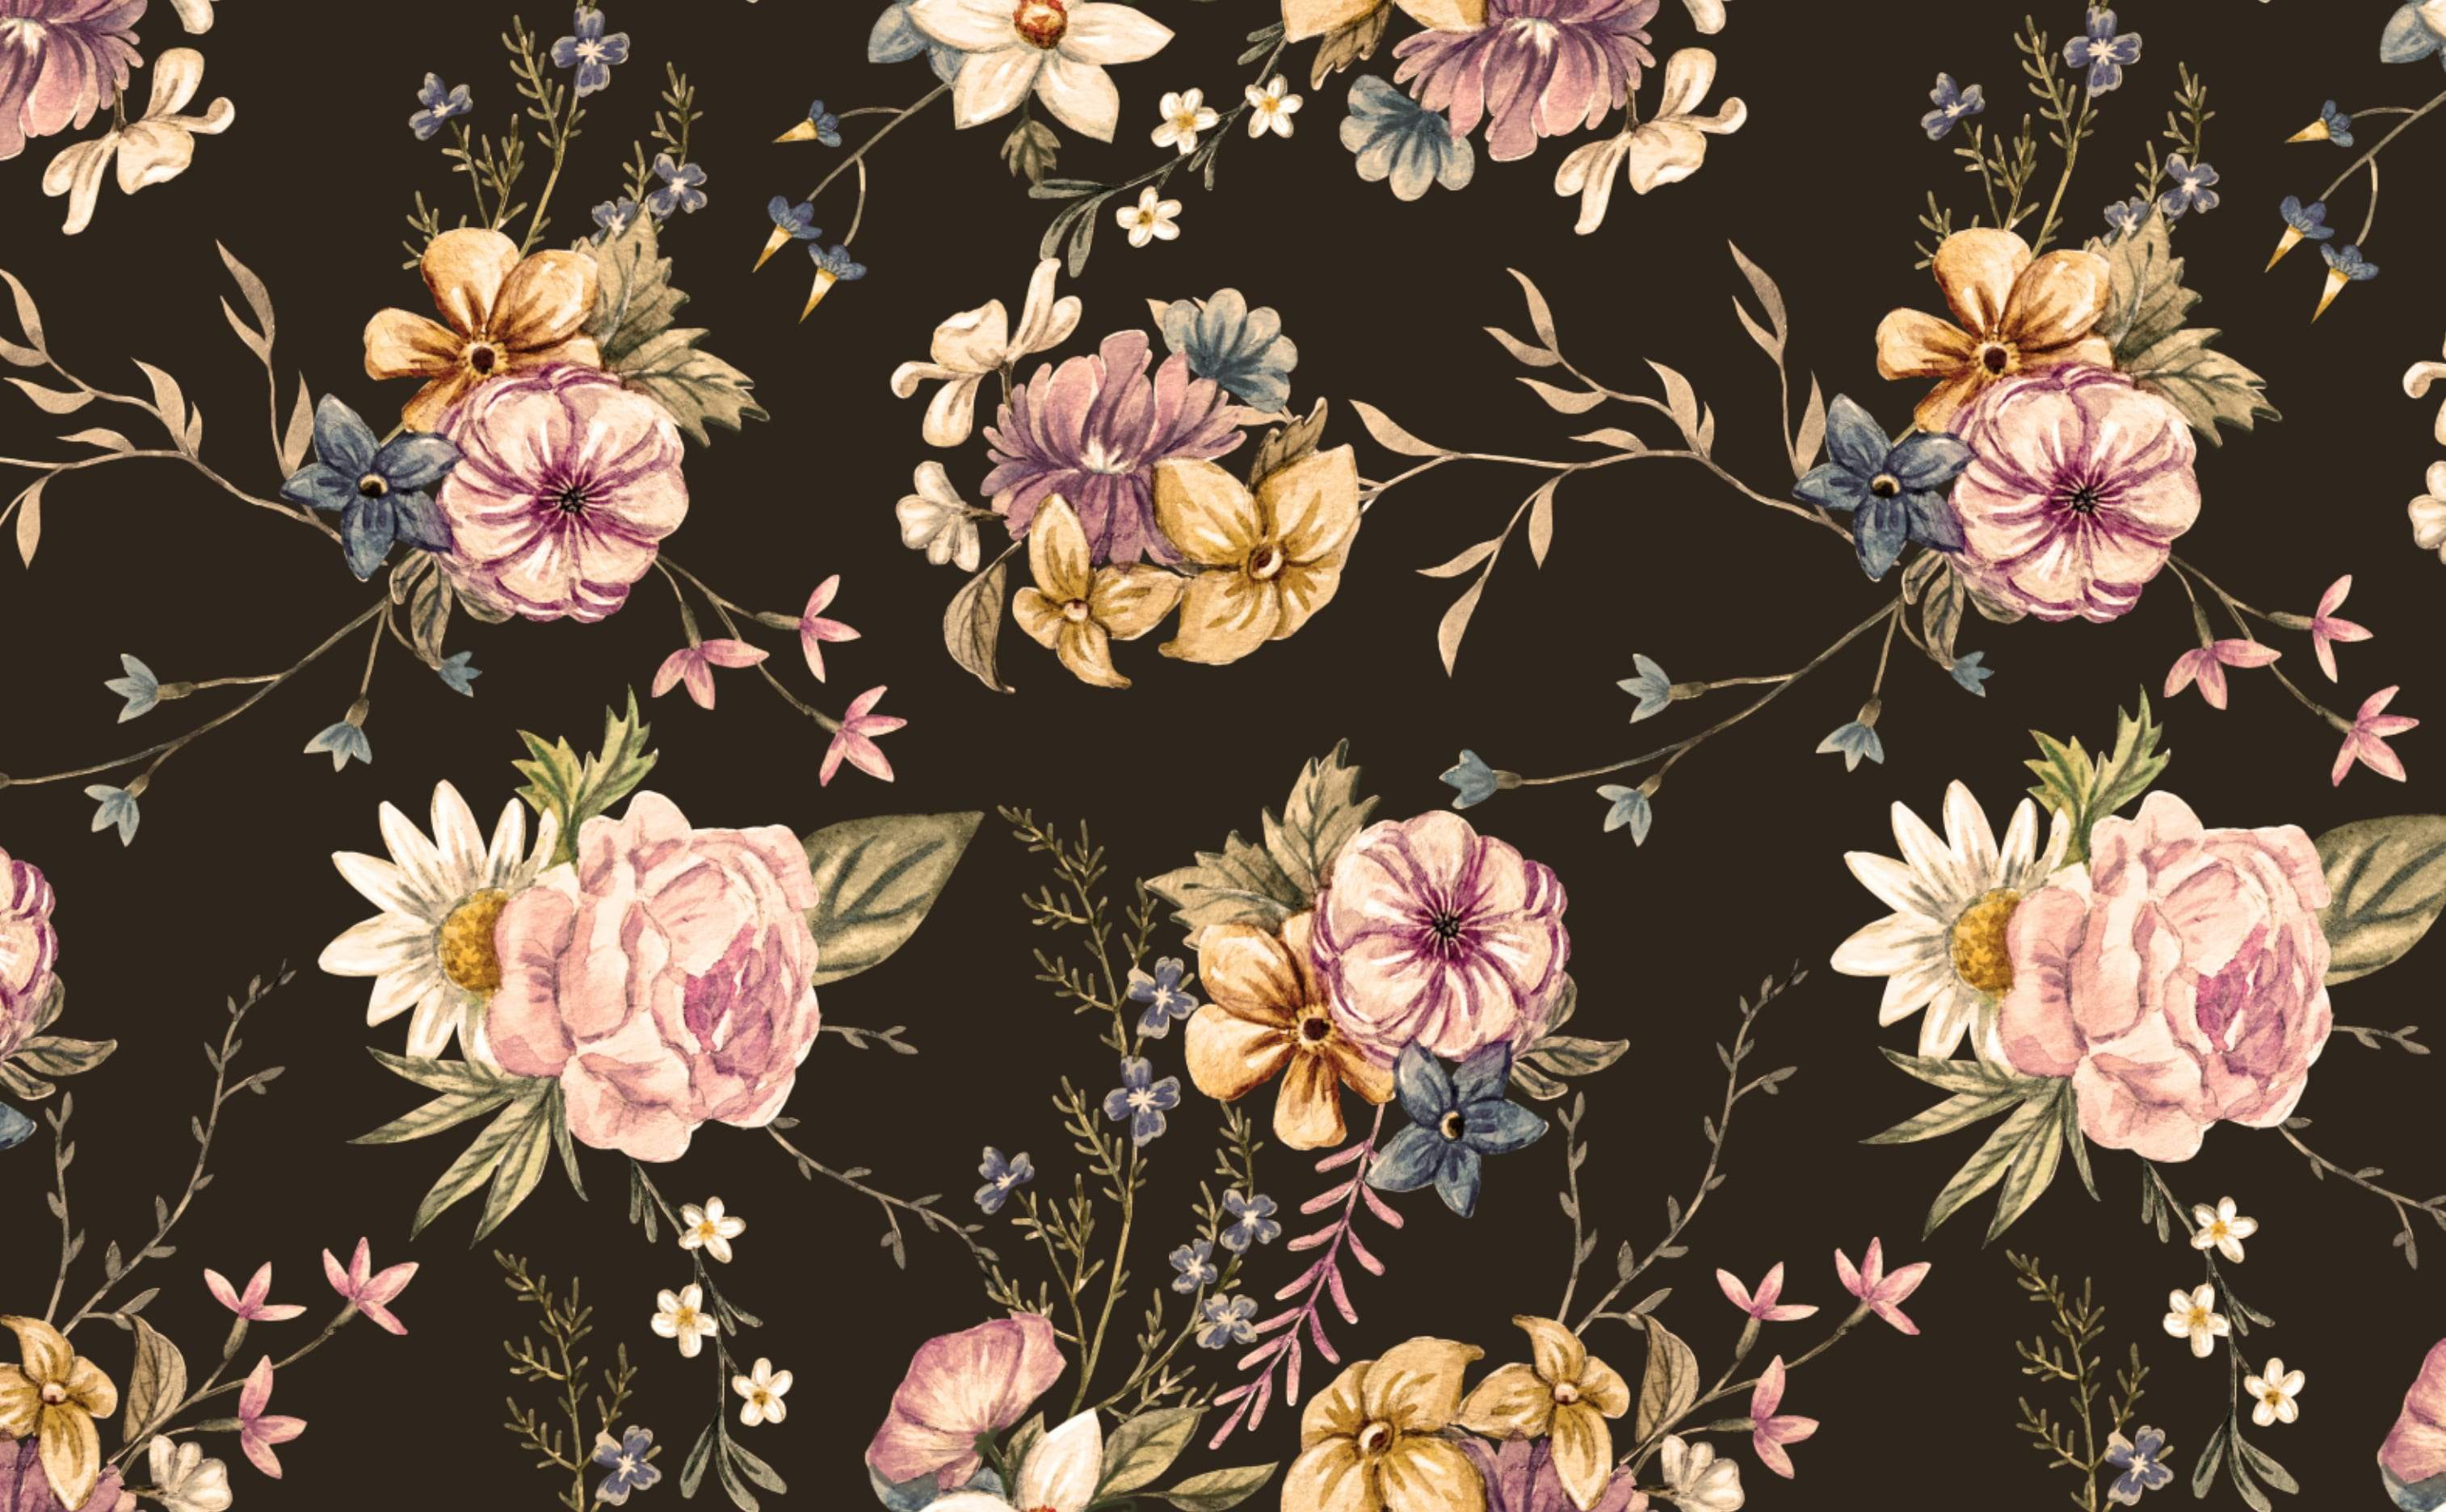 3028x1872 Victorian Flower Wallpapers Top Free Victorian Flower Backgrounds